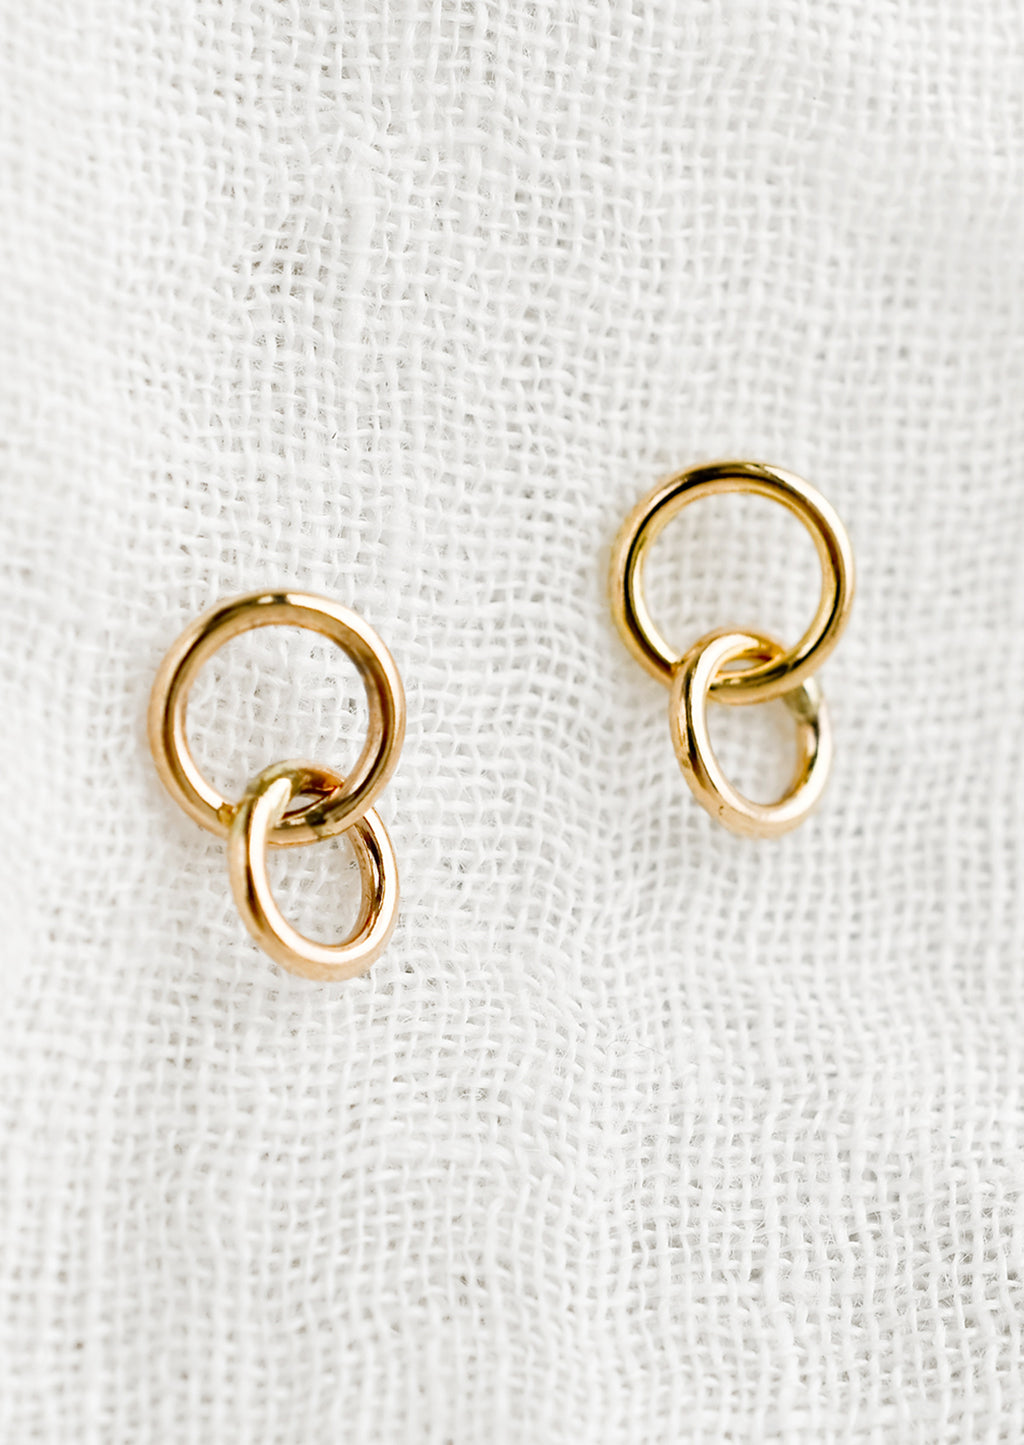 1: A pair of double circle gold earrings.